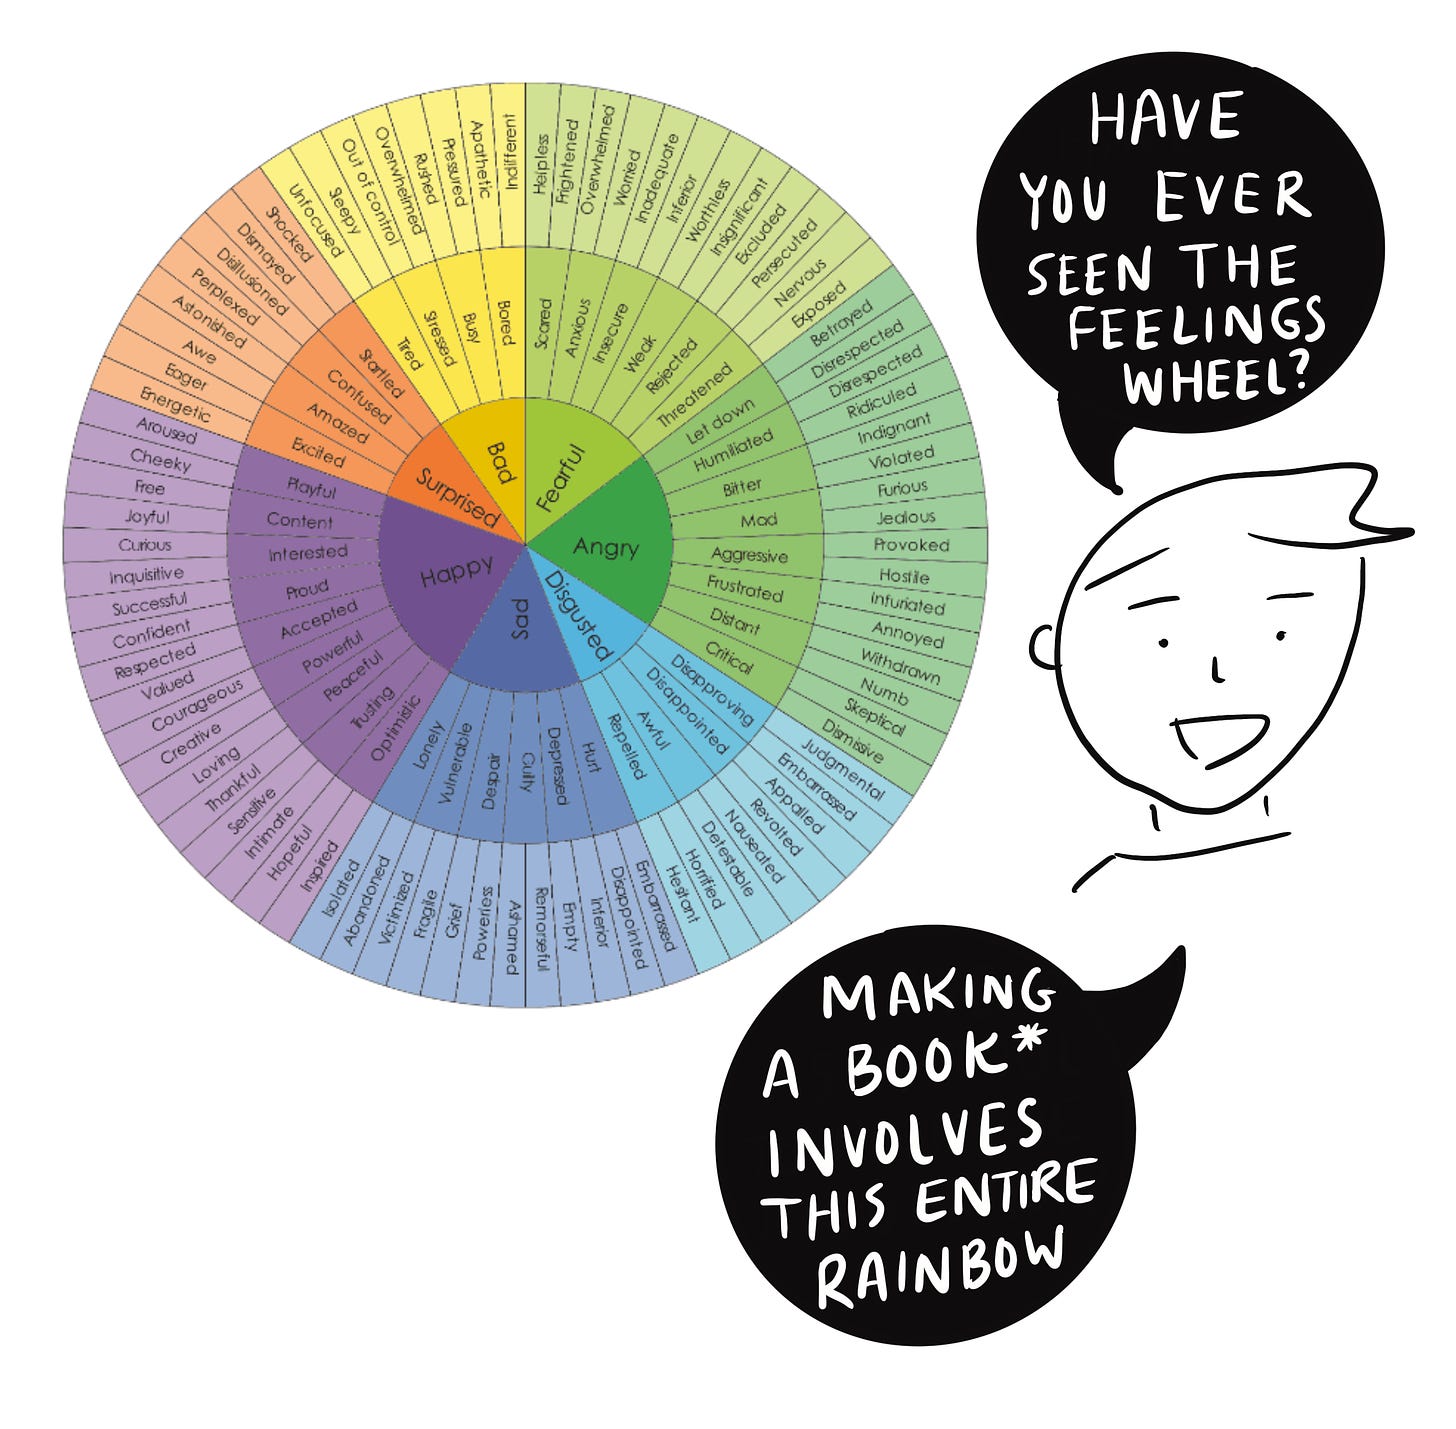 Image of cartoonist- human with short asymmetrical swoopy hair saying “have you ever seen the feelings wheel?” “Making a book involves this entire rainbow*” a picture of a feelings wheel- wheel of many different feelings from sad to mad to happy.